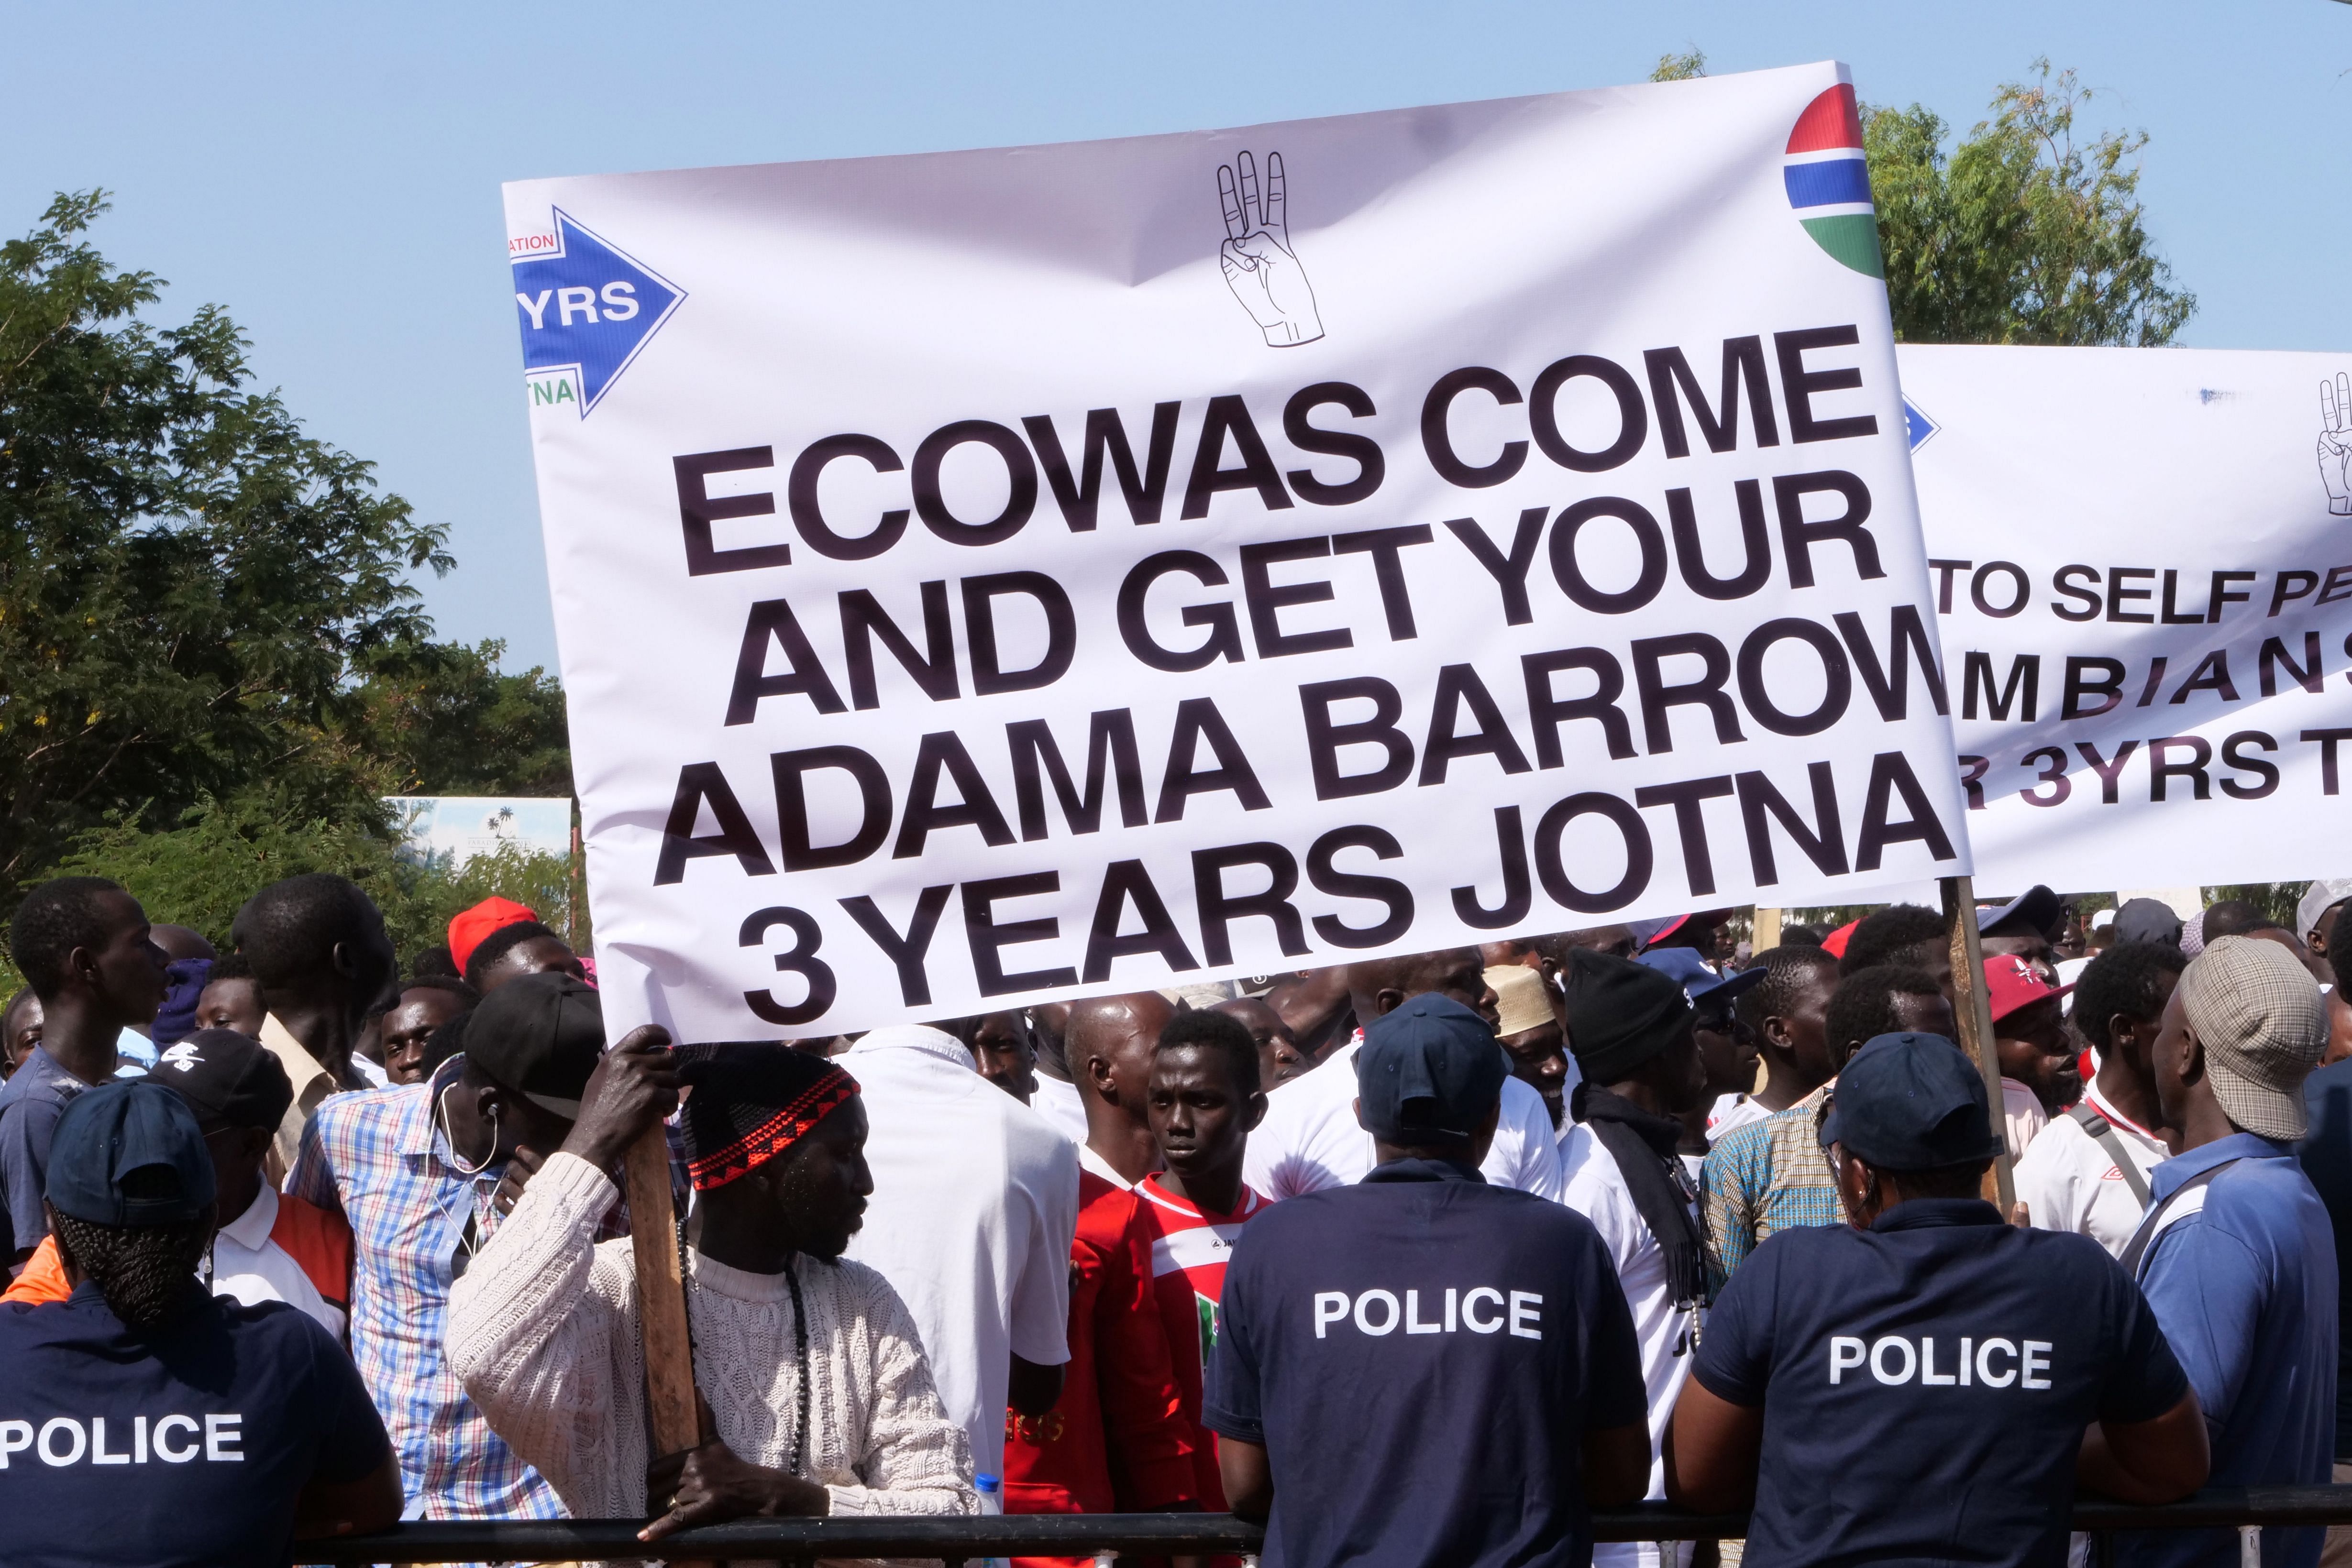 rotesters hold a banner as they take part in a demonstration against Gambian President, in Banjul, Gambia. (AFP Photo)